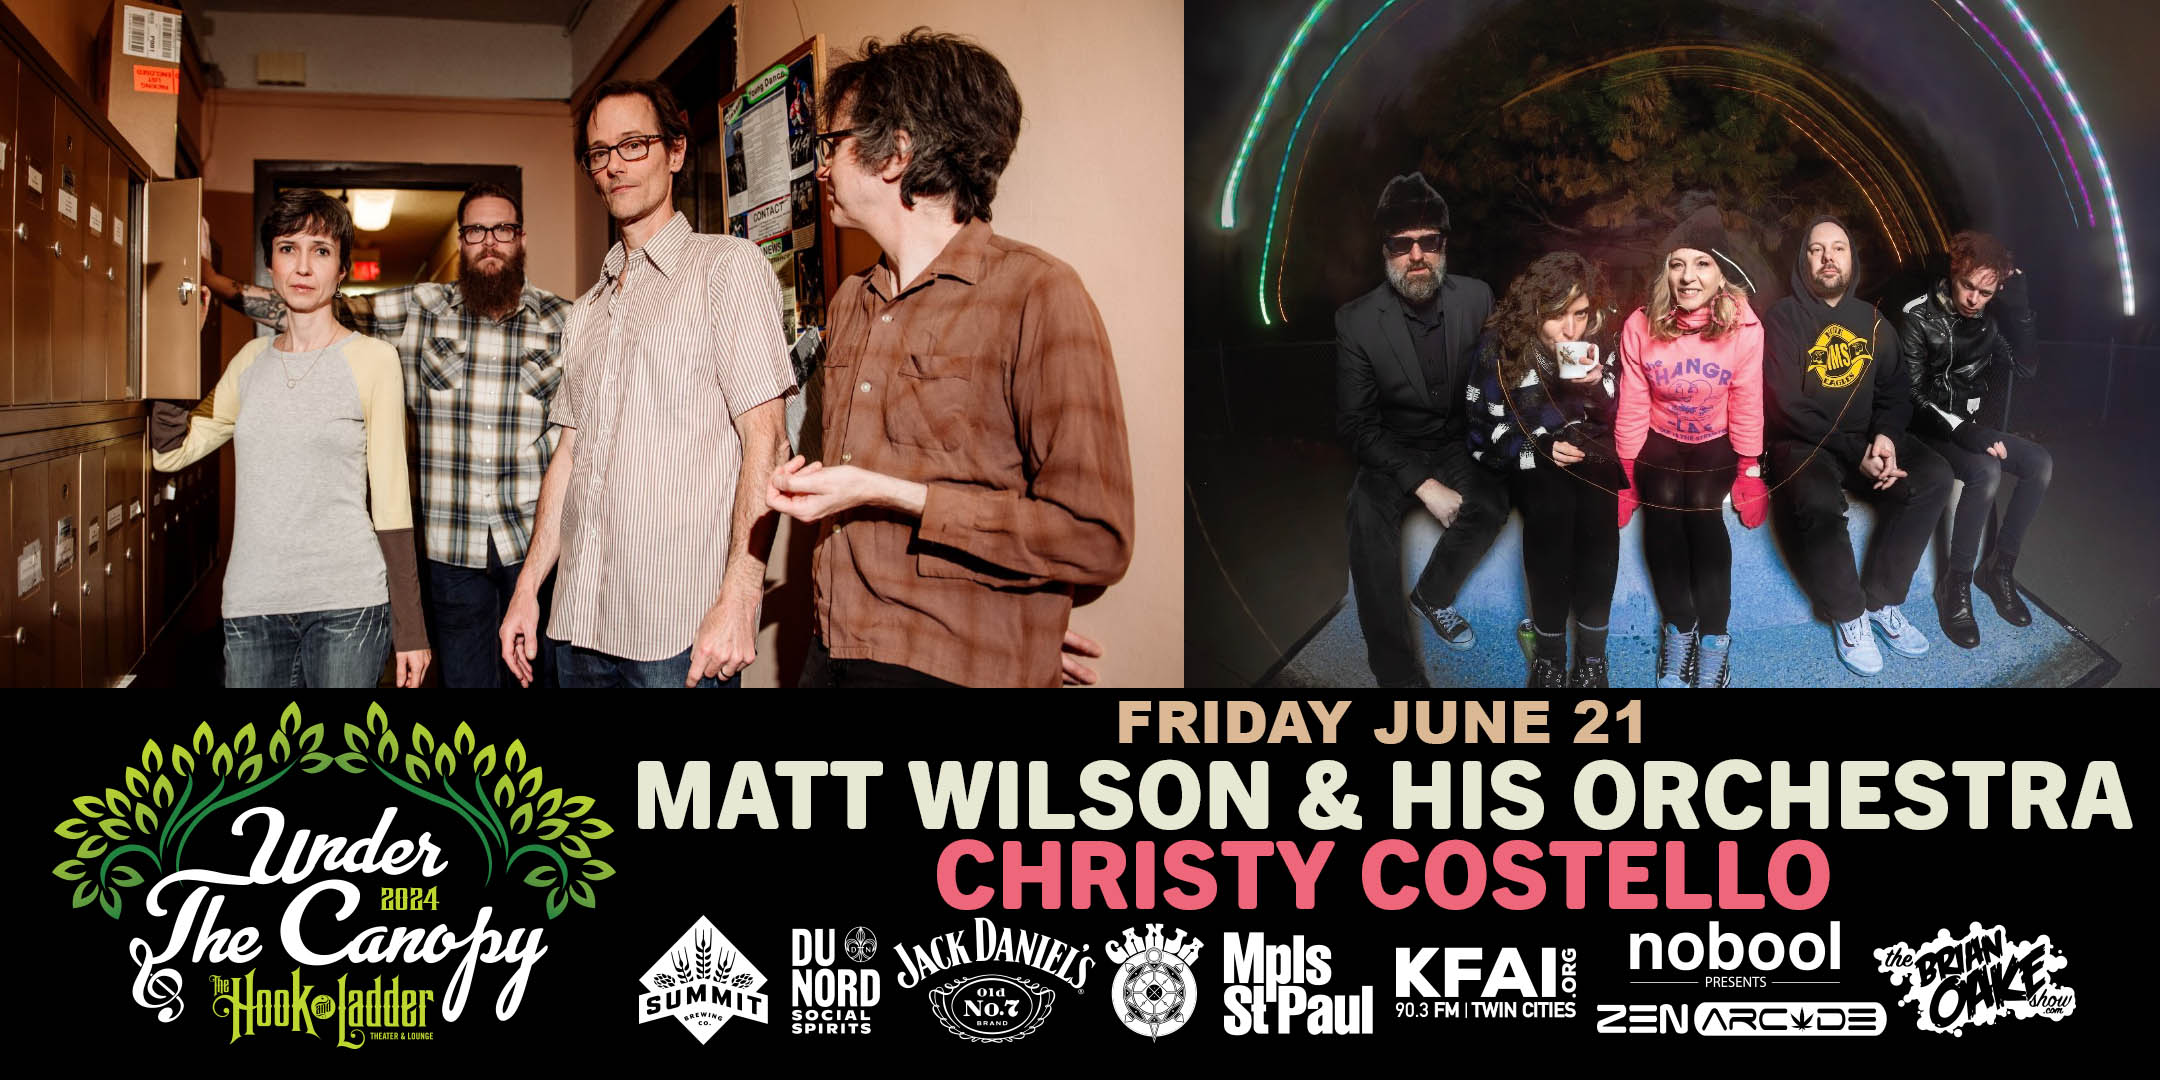 Matt Wilson & His Orchestra / Christy Costello Friday, June 21 Under The Canopy at The Hook and Ladder Theater "An Urban Outdoor Summer Concert Series" Doors 6:00pm :: Music 7:00pm :: 21+ Reserved Seats: $34 GA: $24 ADV / $30 DOS